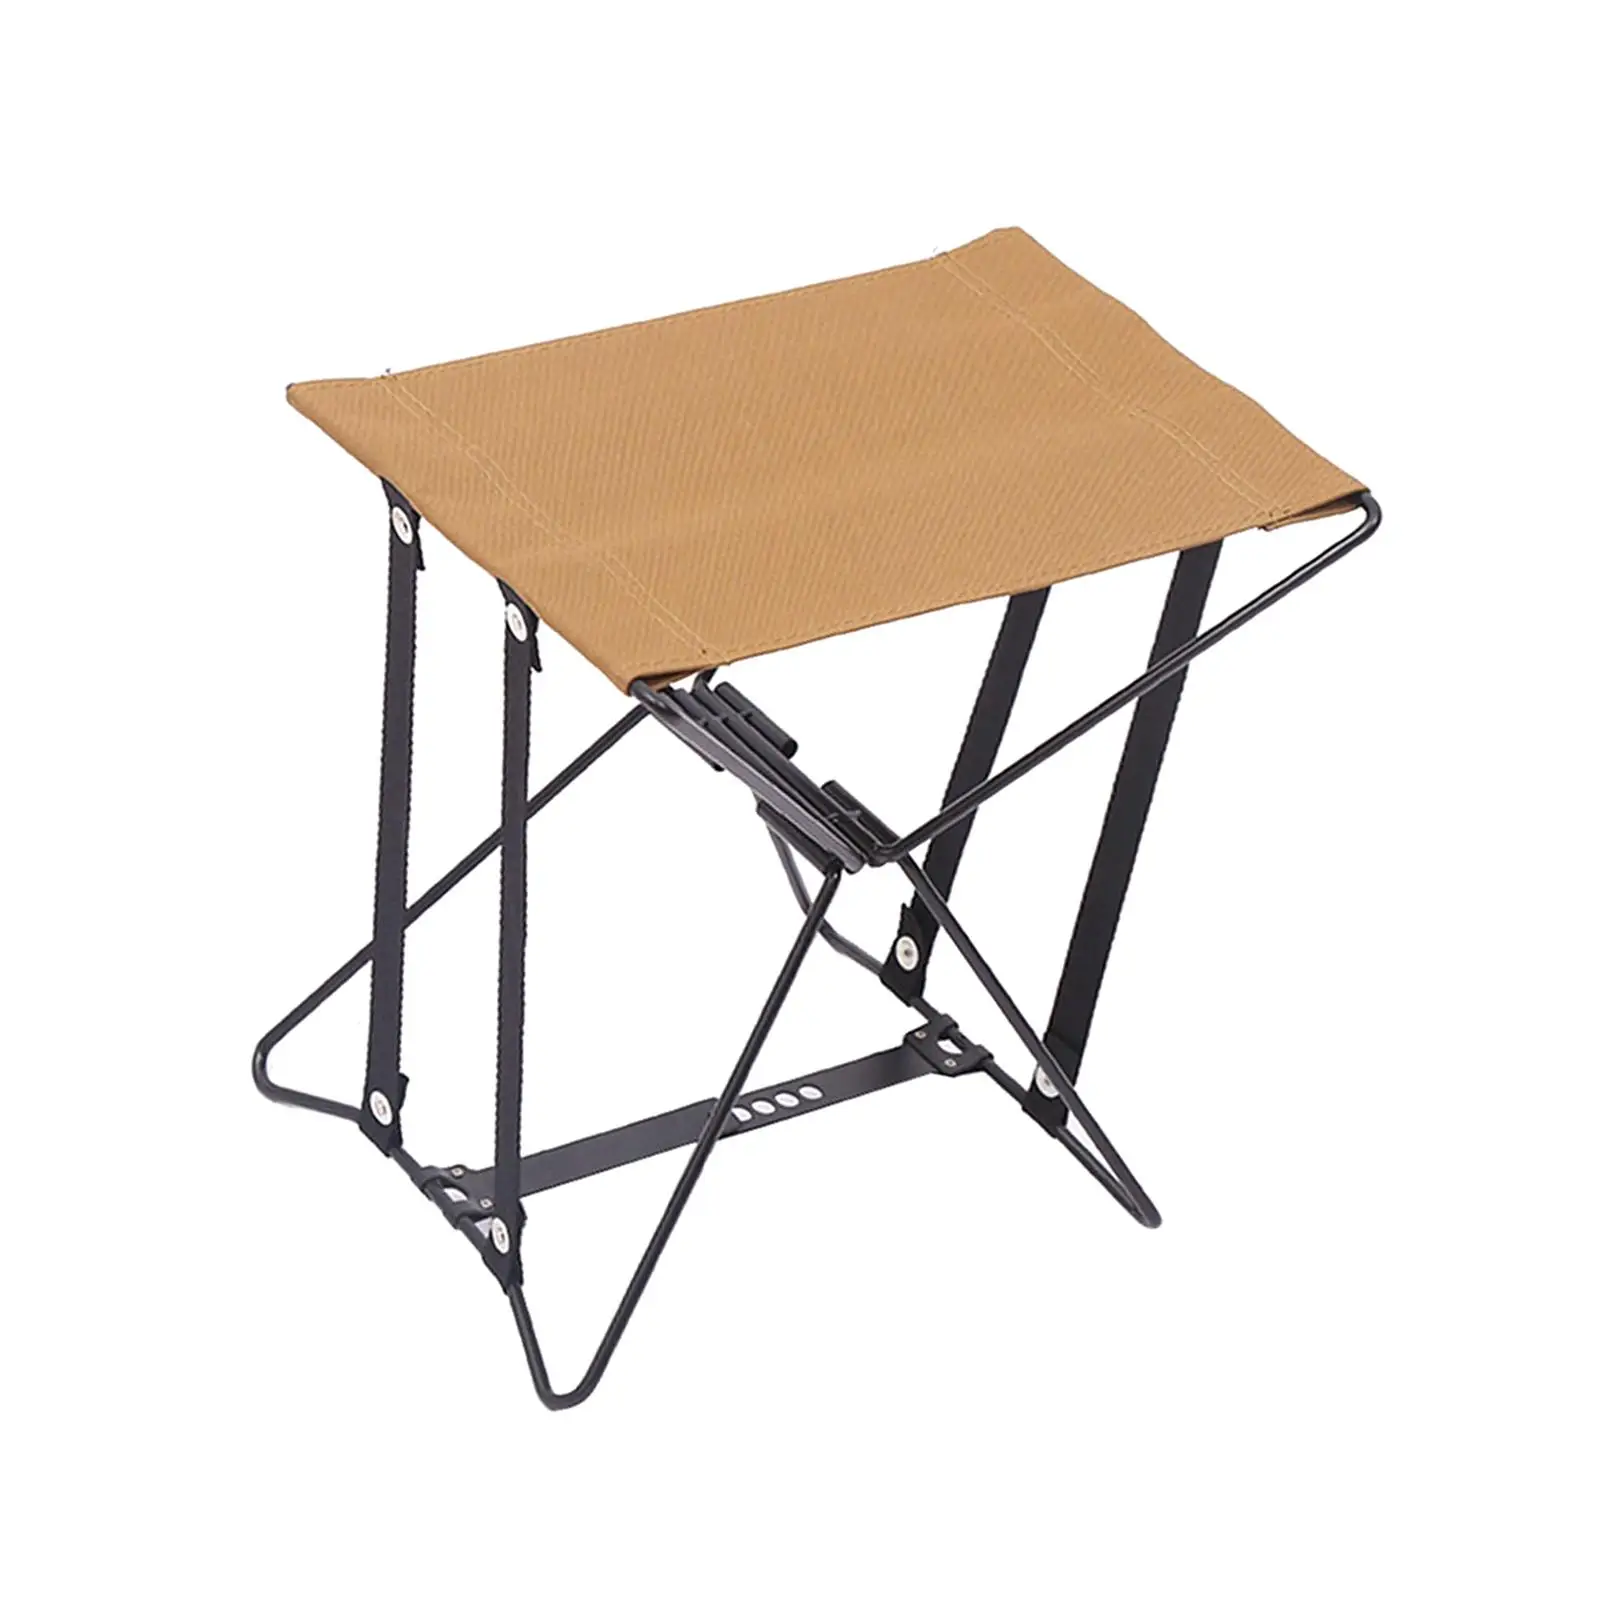 Portable Folding Stool Lightweight Camping Stool for Sports Concert Picnic